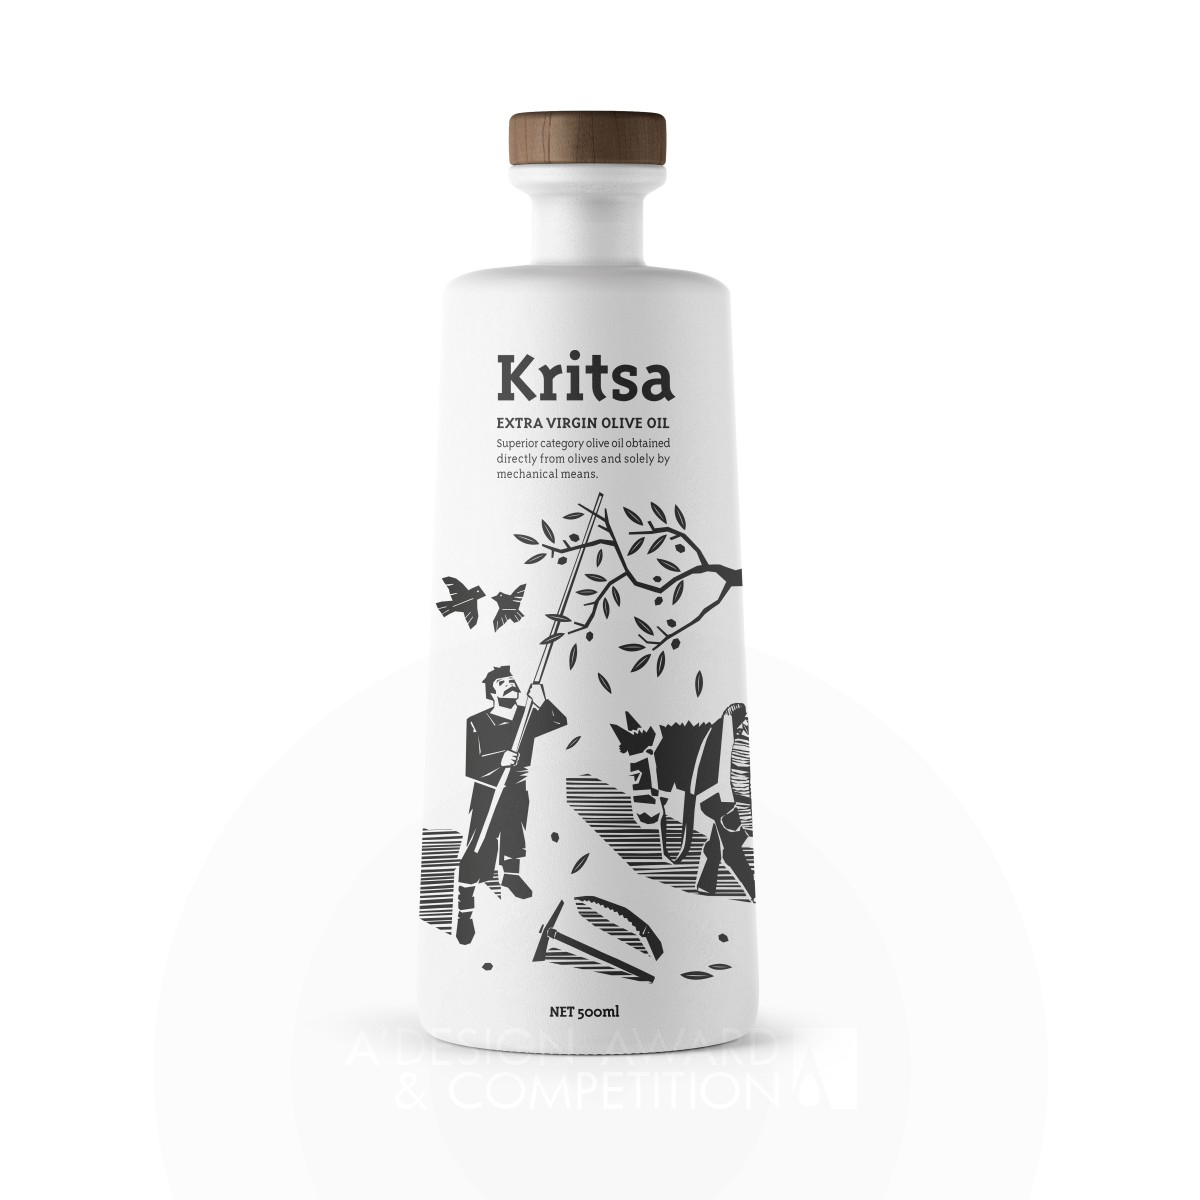 Kritsa extra virgin olive oil Olive oil package by Manos Siganos